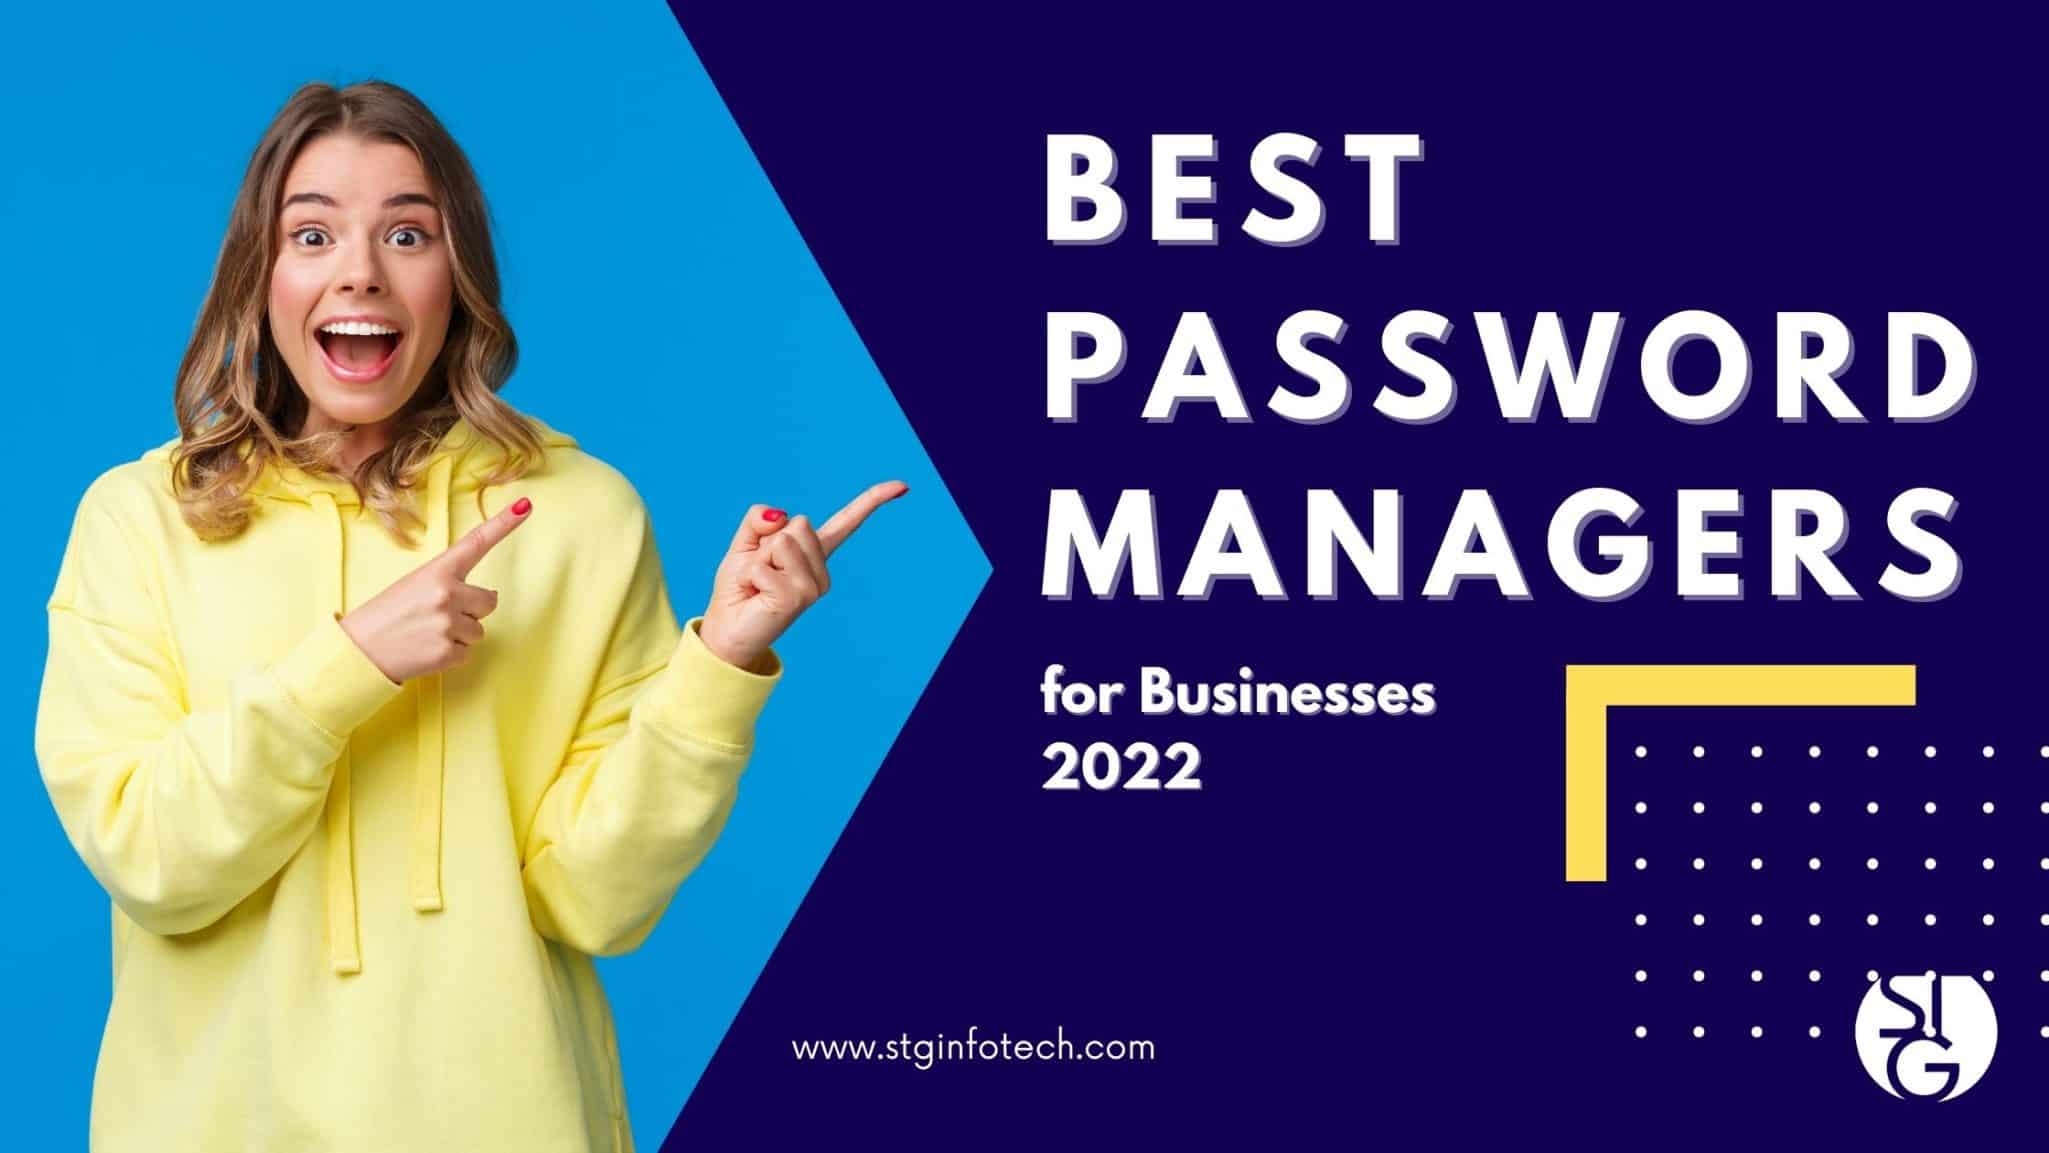 Best Password Managers for Businesses in 2022